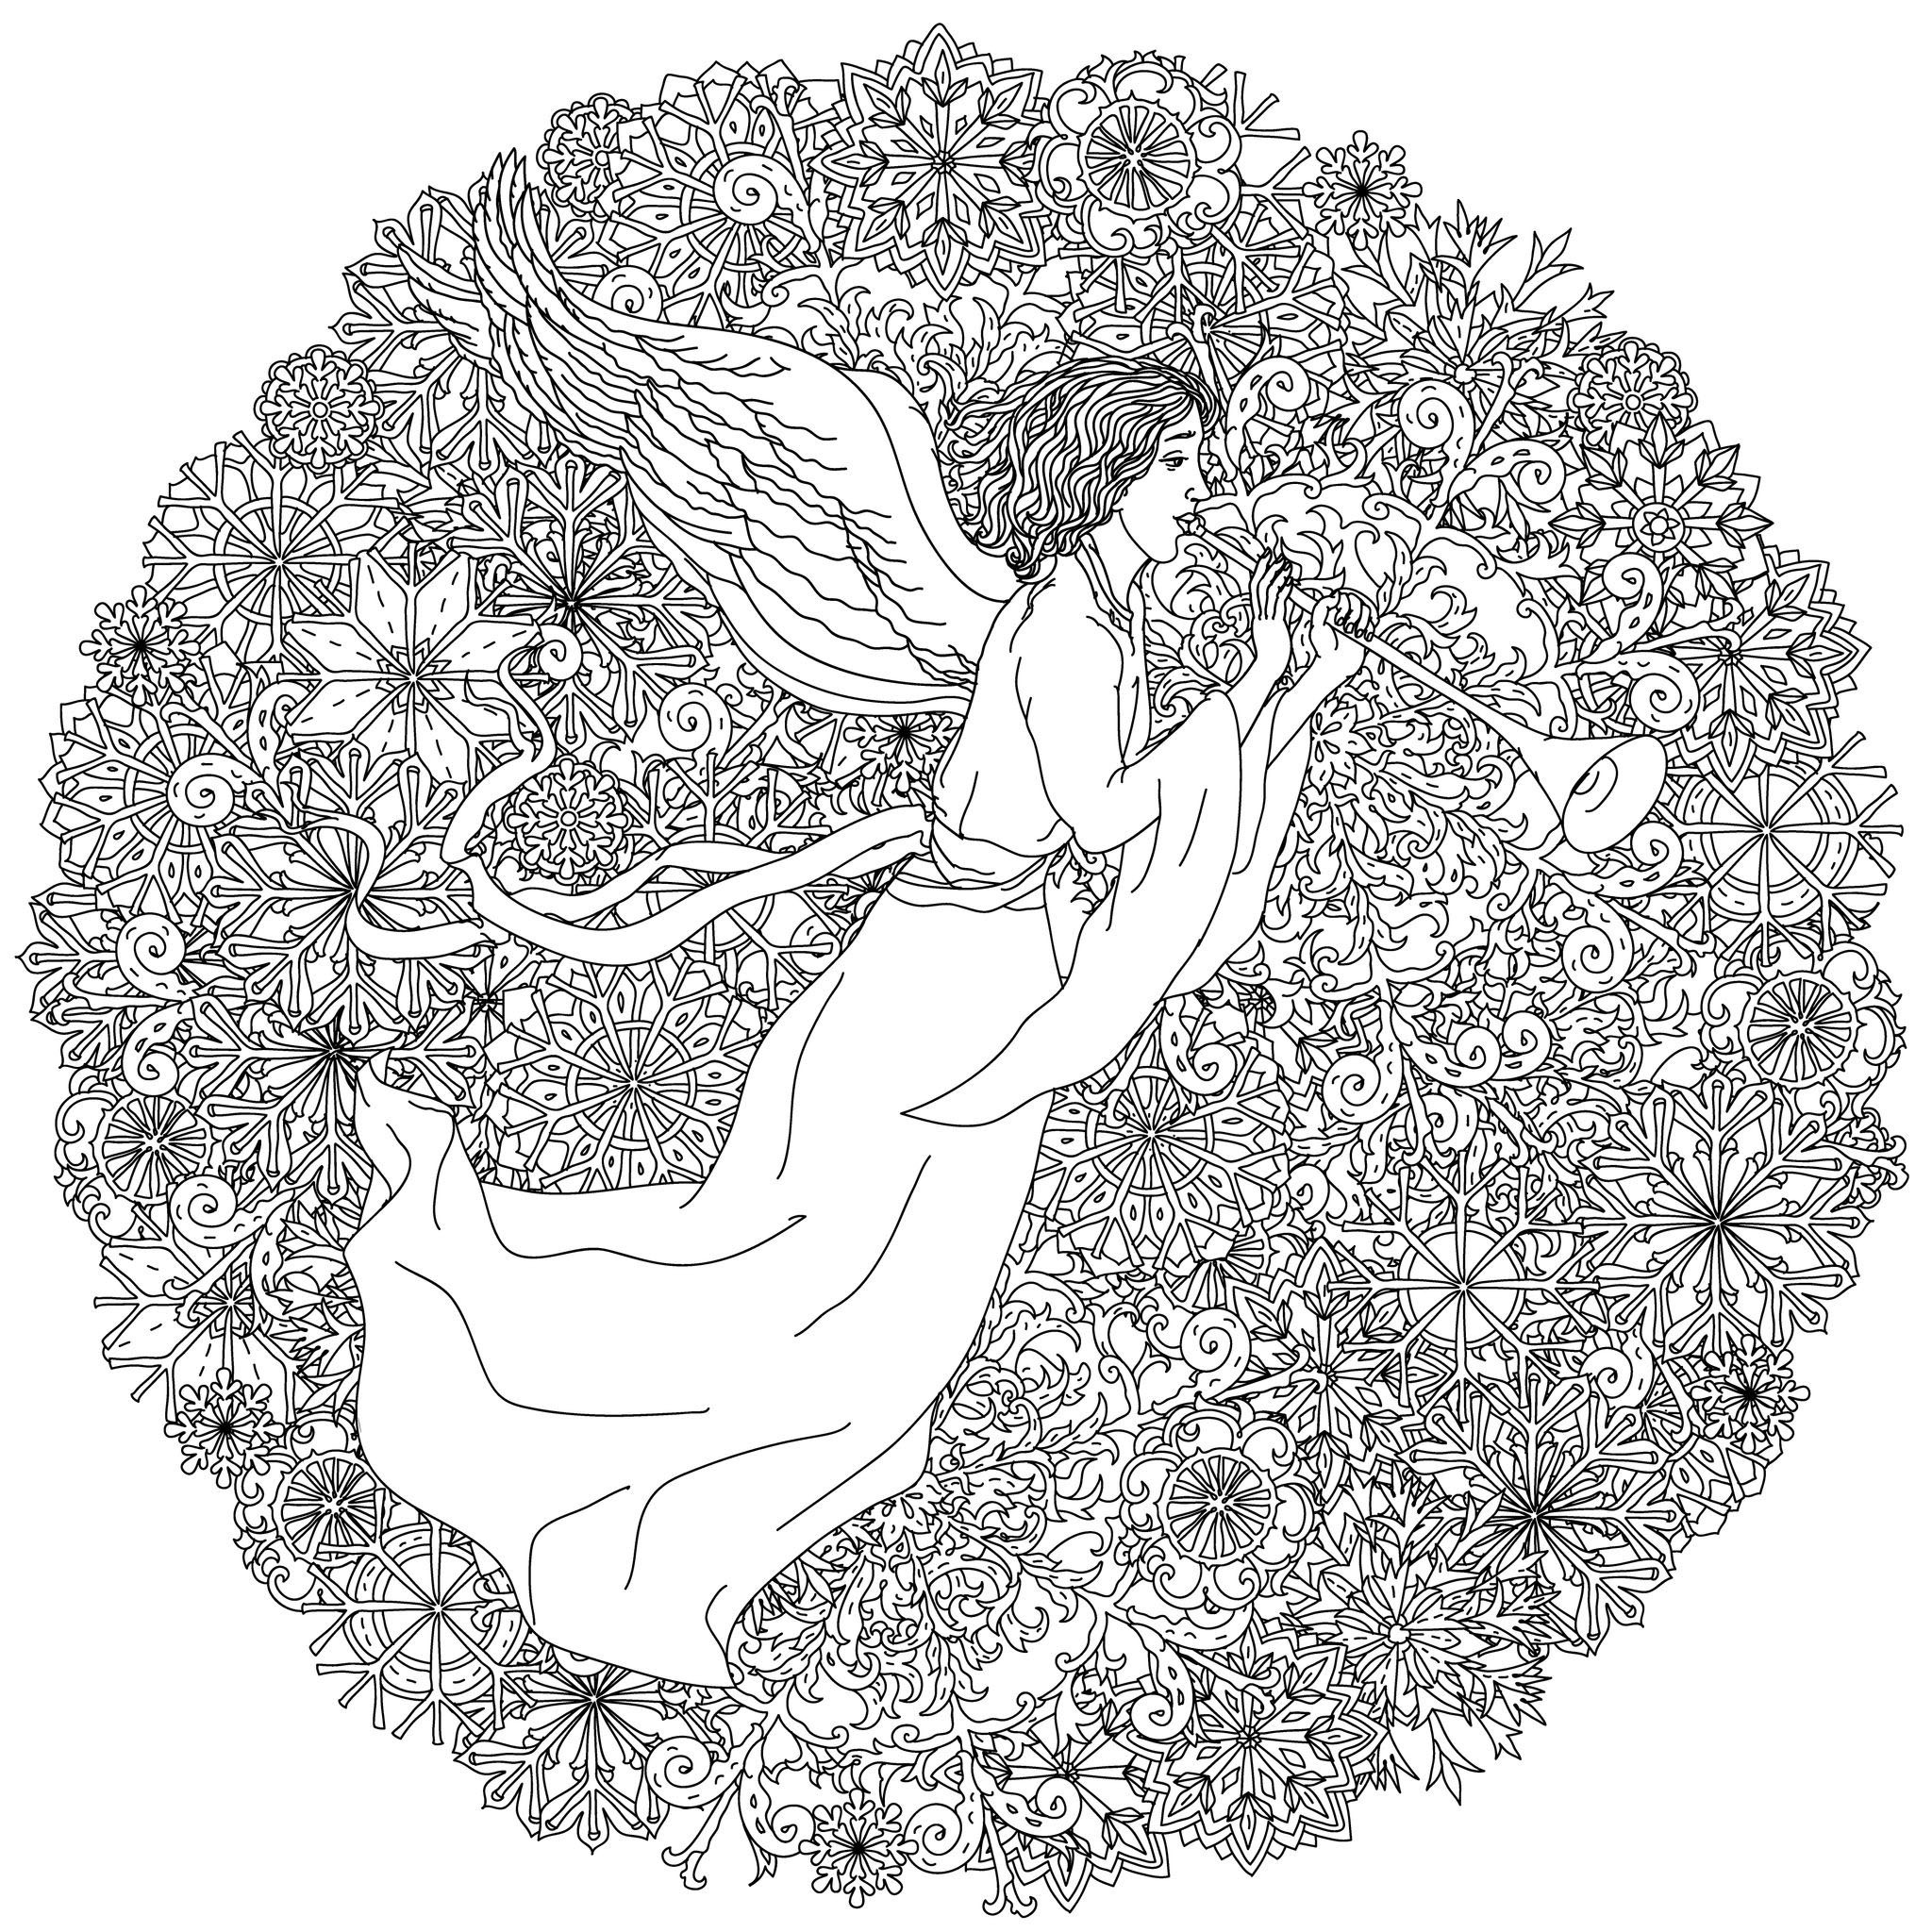 Color this incredible circular drawing with an angel surrounded by plenty of snowflakes, Source : 123rf   Artist : Mashabr